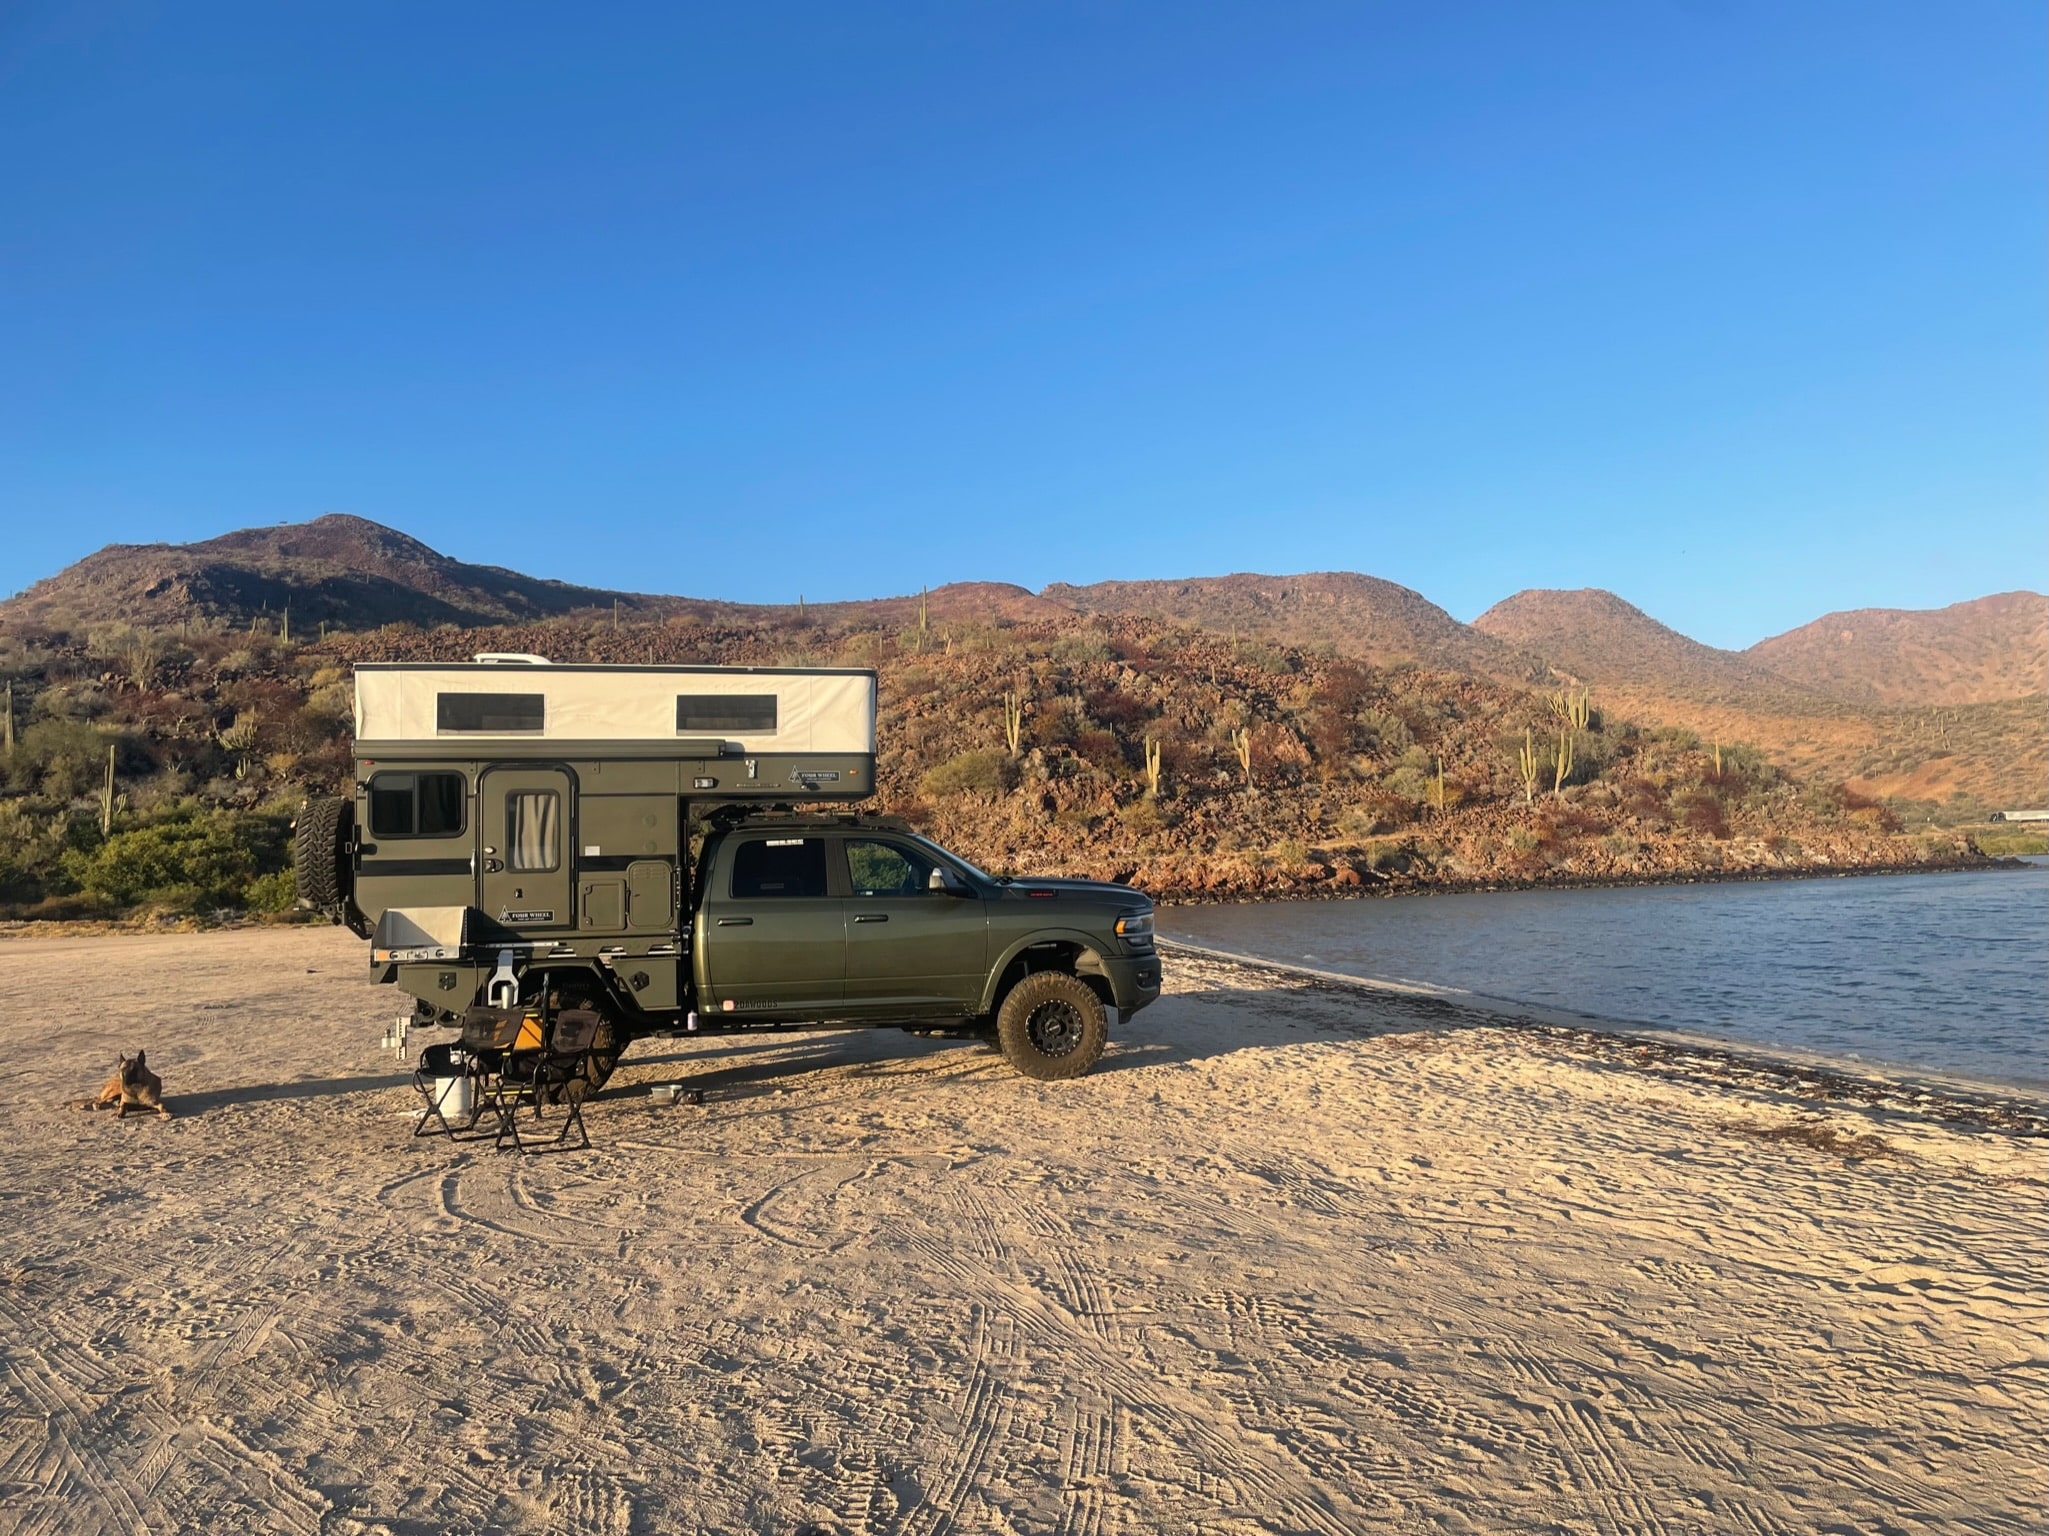 Sean Silvera Truck parked on the beach of a lake with cacti in the back